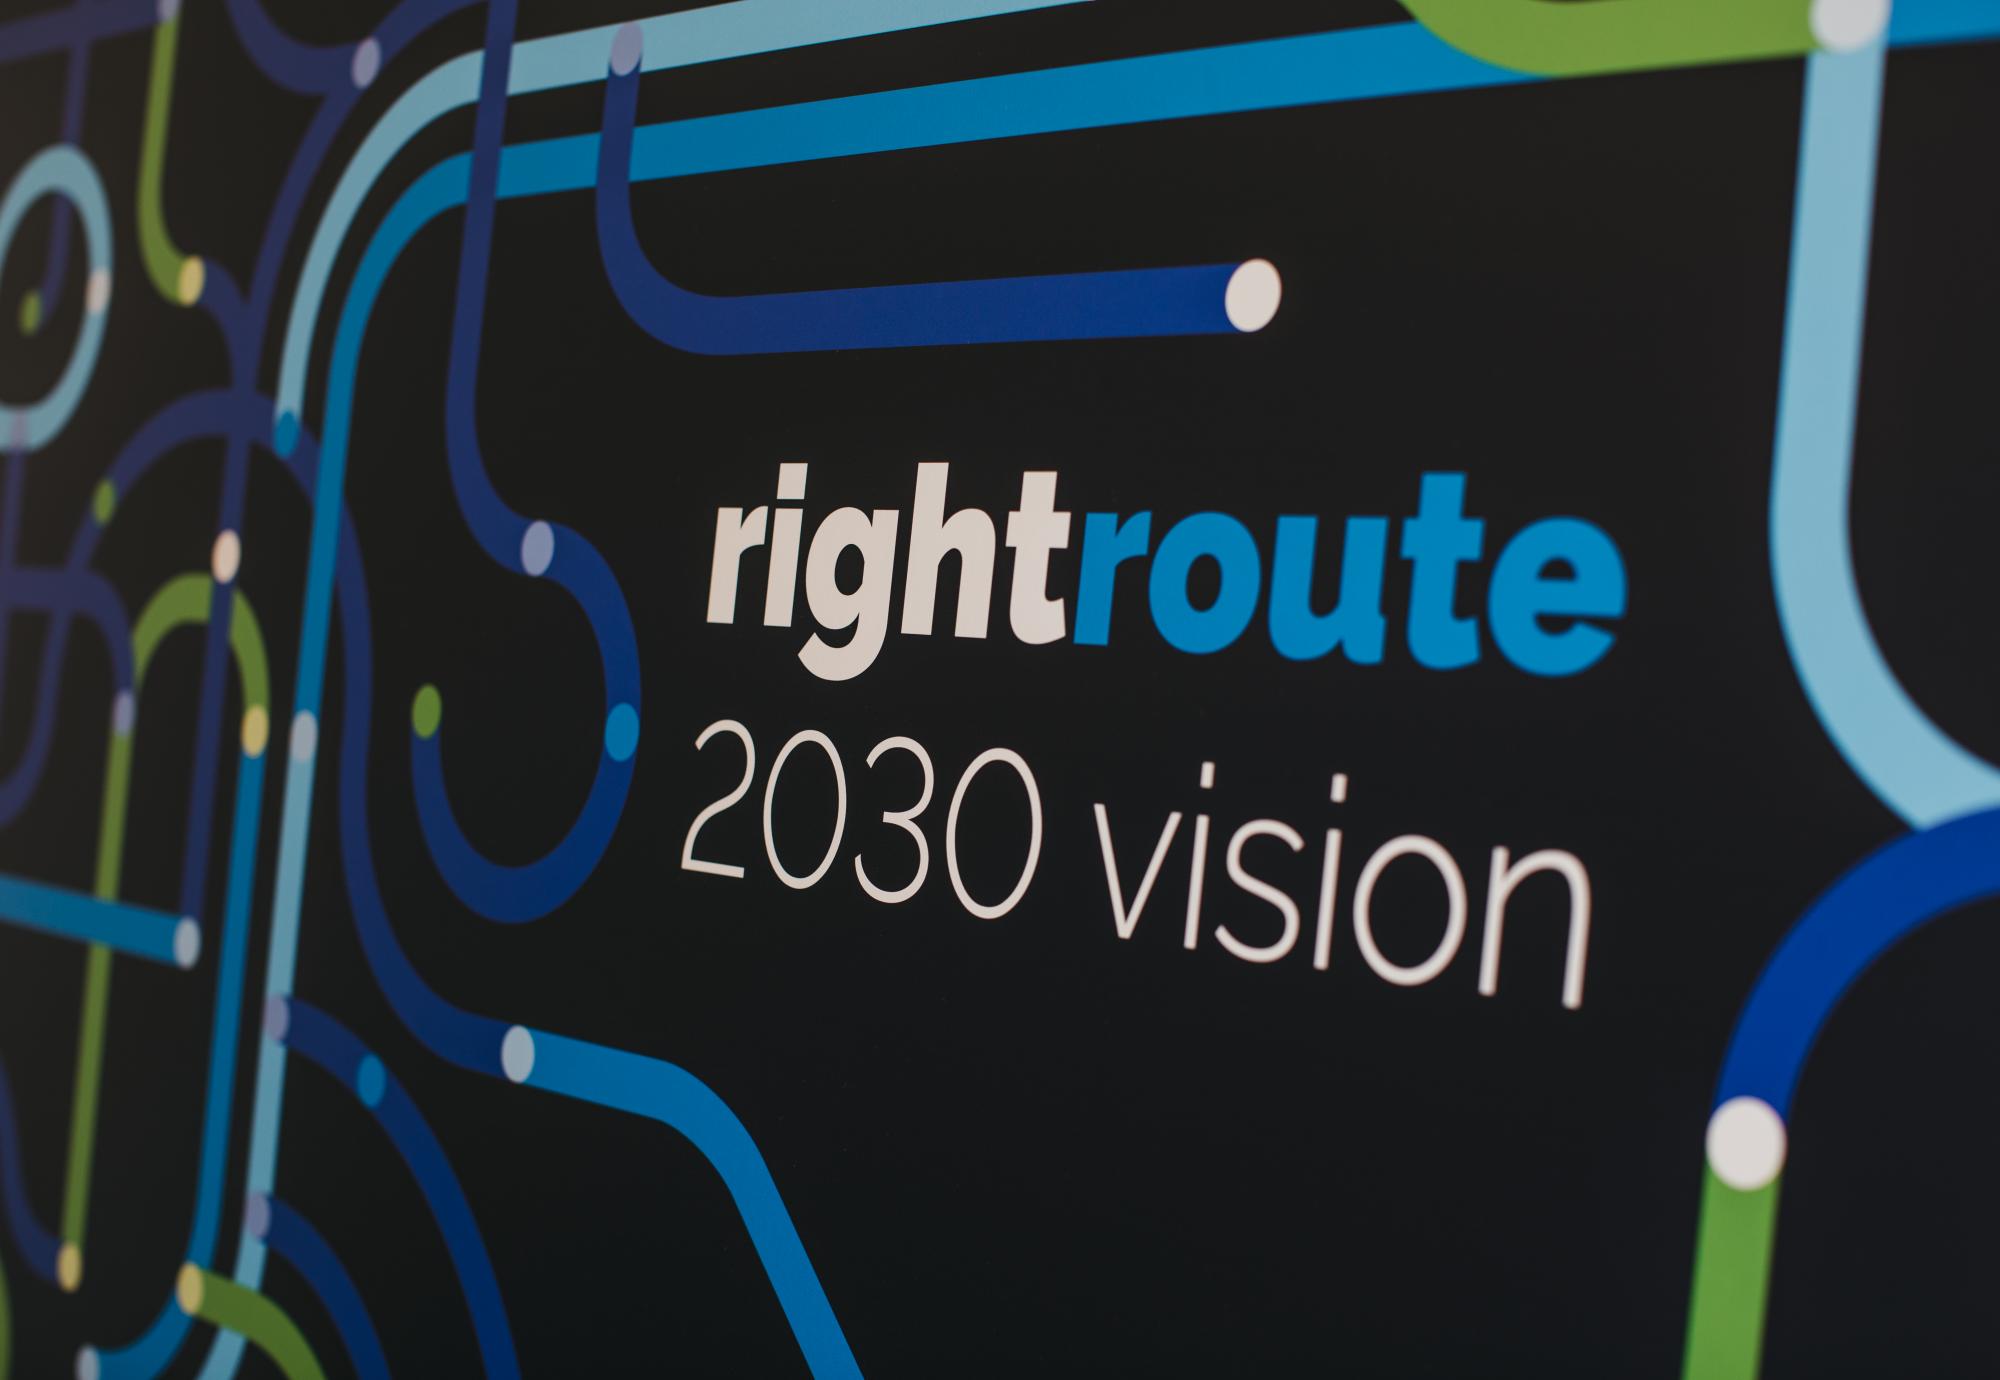 Chiltern Railways plots greener future with ‘Right Route’ 2030 vision